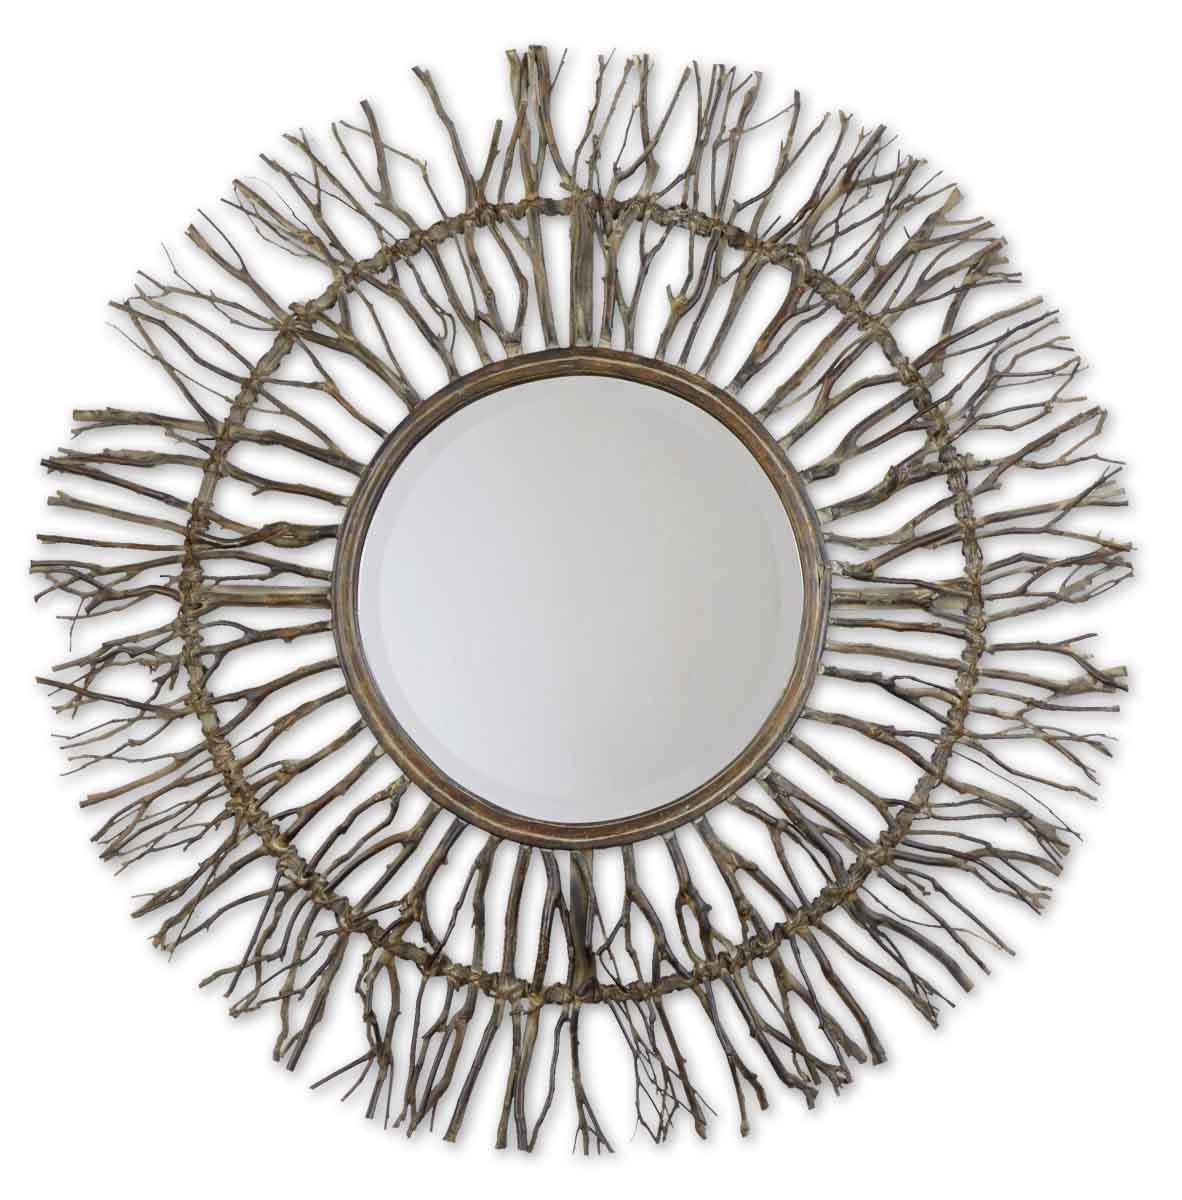 Frame Is Made Of Real Birch Branches Woven Onto A Wooden Frame With Burnished Edges And Light Gray Accents. Mirror Has A G...